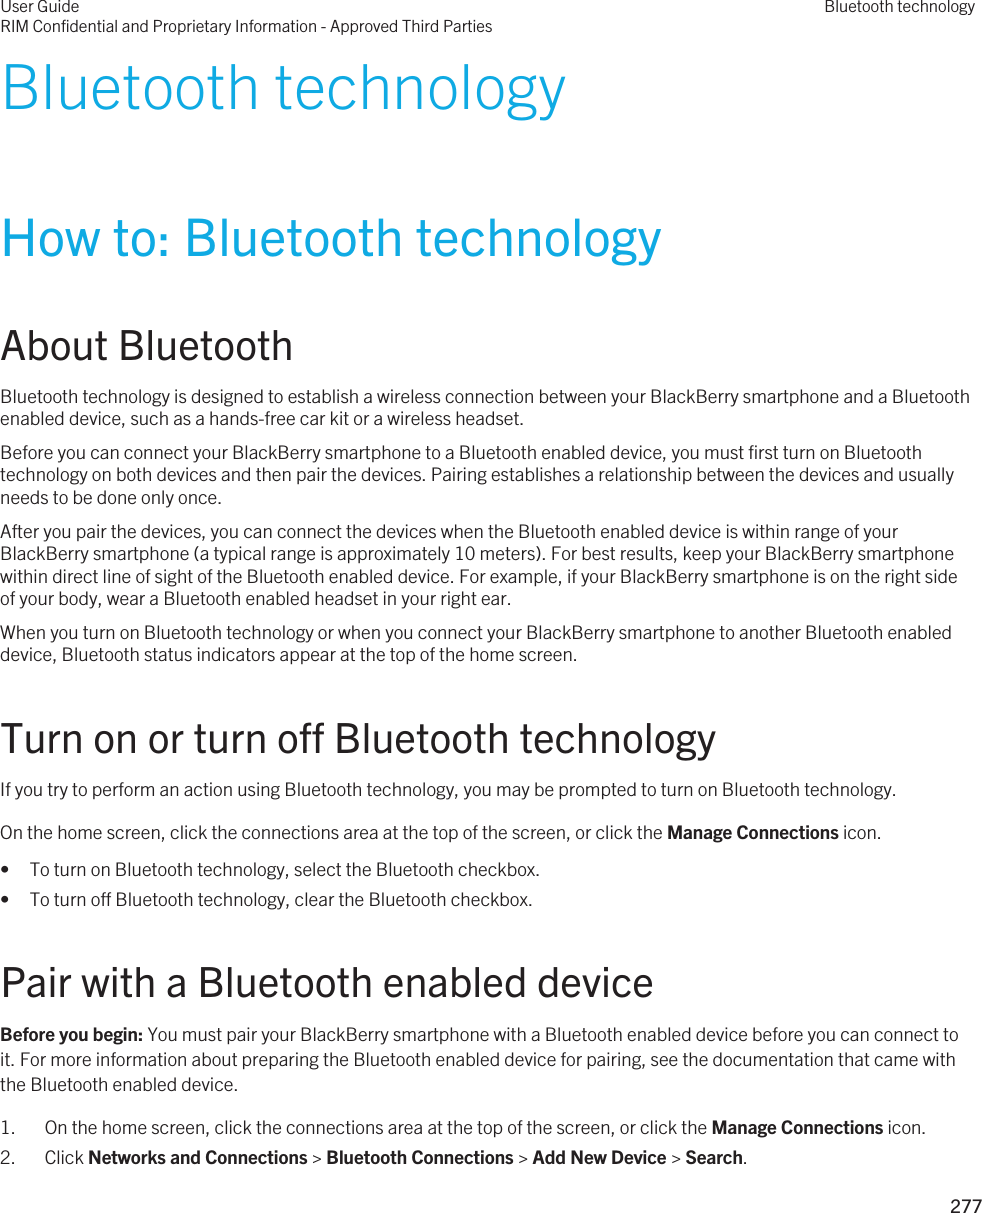 Bluetooth technologyHow to: Bluetooth technologyAbout BluetoothBluetooth technology is designed to establish a wireless connection between your BlackBerry smartphone and a Bluetooth enabled device, such as a hands-free car kit or a wireless headset.Before you can connect your BlackBerry smartphone to a Bluetooth enabled device, you must first turn on Bluetooth technology on both devices and then pair the devices. Pairing establishes a relationship between the devices and usually needs to be done only once.After you pair the devices, you can connect the devices when the Bluetooth enabled device is within range of your BlackBerry smartphone (a typical range is approximately 10 meters). For best results, keep your BlackBerry smartphone within direct line of sight of the Bluetooth enabled device. For example, if your BlackBerry smartphone is on the right side of your body, wear a Bluetooth enabled headset in your right ear.When you turn on Bluetooth technology or when you connect your BlackBerry smartphone to another Bluetooth enabled device, Bluetooth status indicators appear at the top of the home screen.Turn on or turn off Bluetooth technologyIf you try to perform an action using Bluetooth technology, you may be prompted to turn on Bluetooth technology.On the home screen, click the connections area at the top of the screen, or click the Manage Connections icon.• To turn on Bluetooth technology, select the Bluetooth checkbox.• To turn off Bluetooth technology, clear the Bluetooth checkbox.Pair with a Bluetooth enabled deviceBefore you begin: You must pair your BlackBerry smartphone with a Bluetooth enabled device before you can connect to it. For more information about preparing the Bluetooth enabled device for pairing, see the documentation that came with the Bluetooth enabled device.1. On the home screen, click the connections area at the top of the screen, or click the Manage Connections icon.2. Click Networks and Connections &gt; Bluetooth Connections &gt; Add New Device &gt; Search.User GuideRIM Confidential and Proprietary Information - Approved Third PartiesBluetooth technology277 